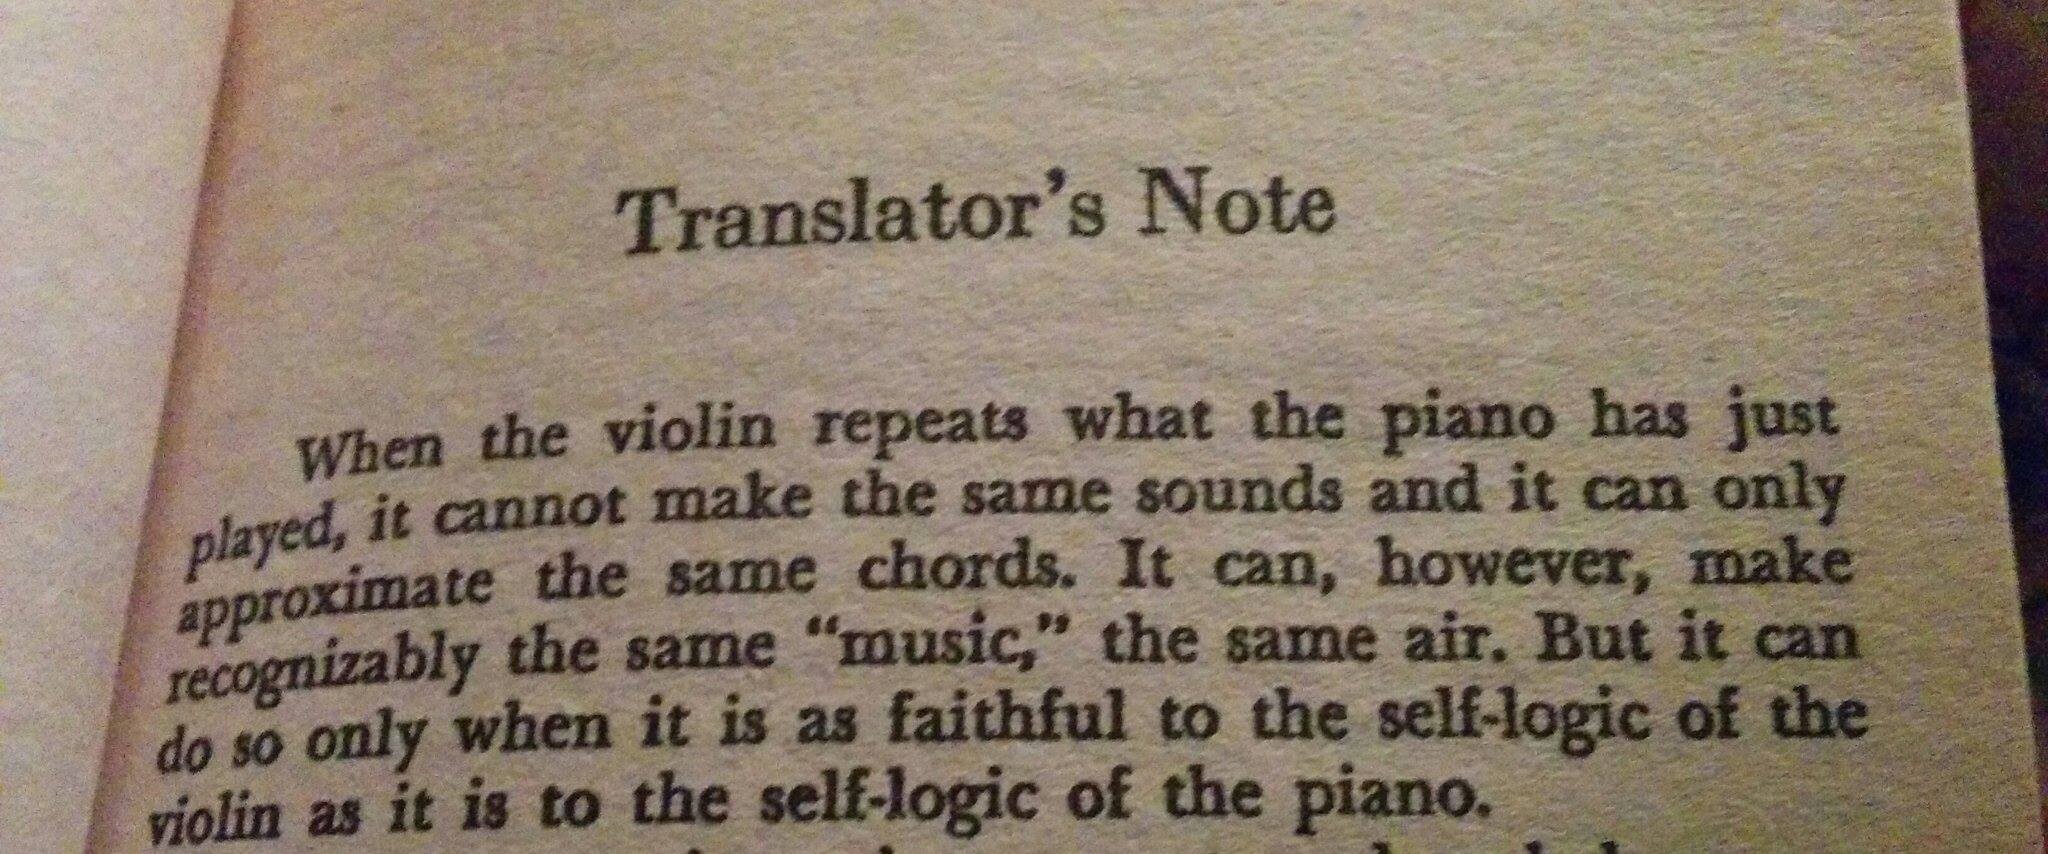 Translator's Note: When the violin repeats what the piano has just played, it cannot make the same sounds and it can only approximate the same chords. It can, however, make recognizably the same 'music', the same air. But it can do so only when it is as faithful to the self-logic of the violin as it is to the self-logic of the piano.